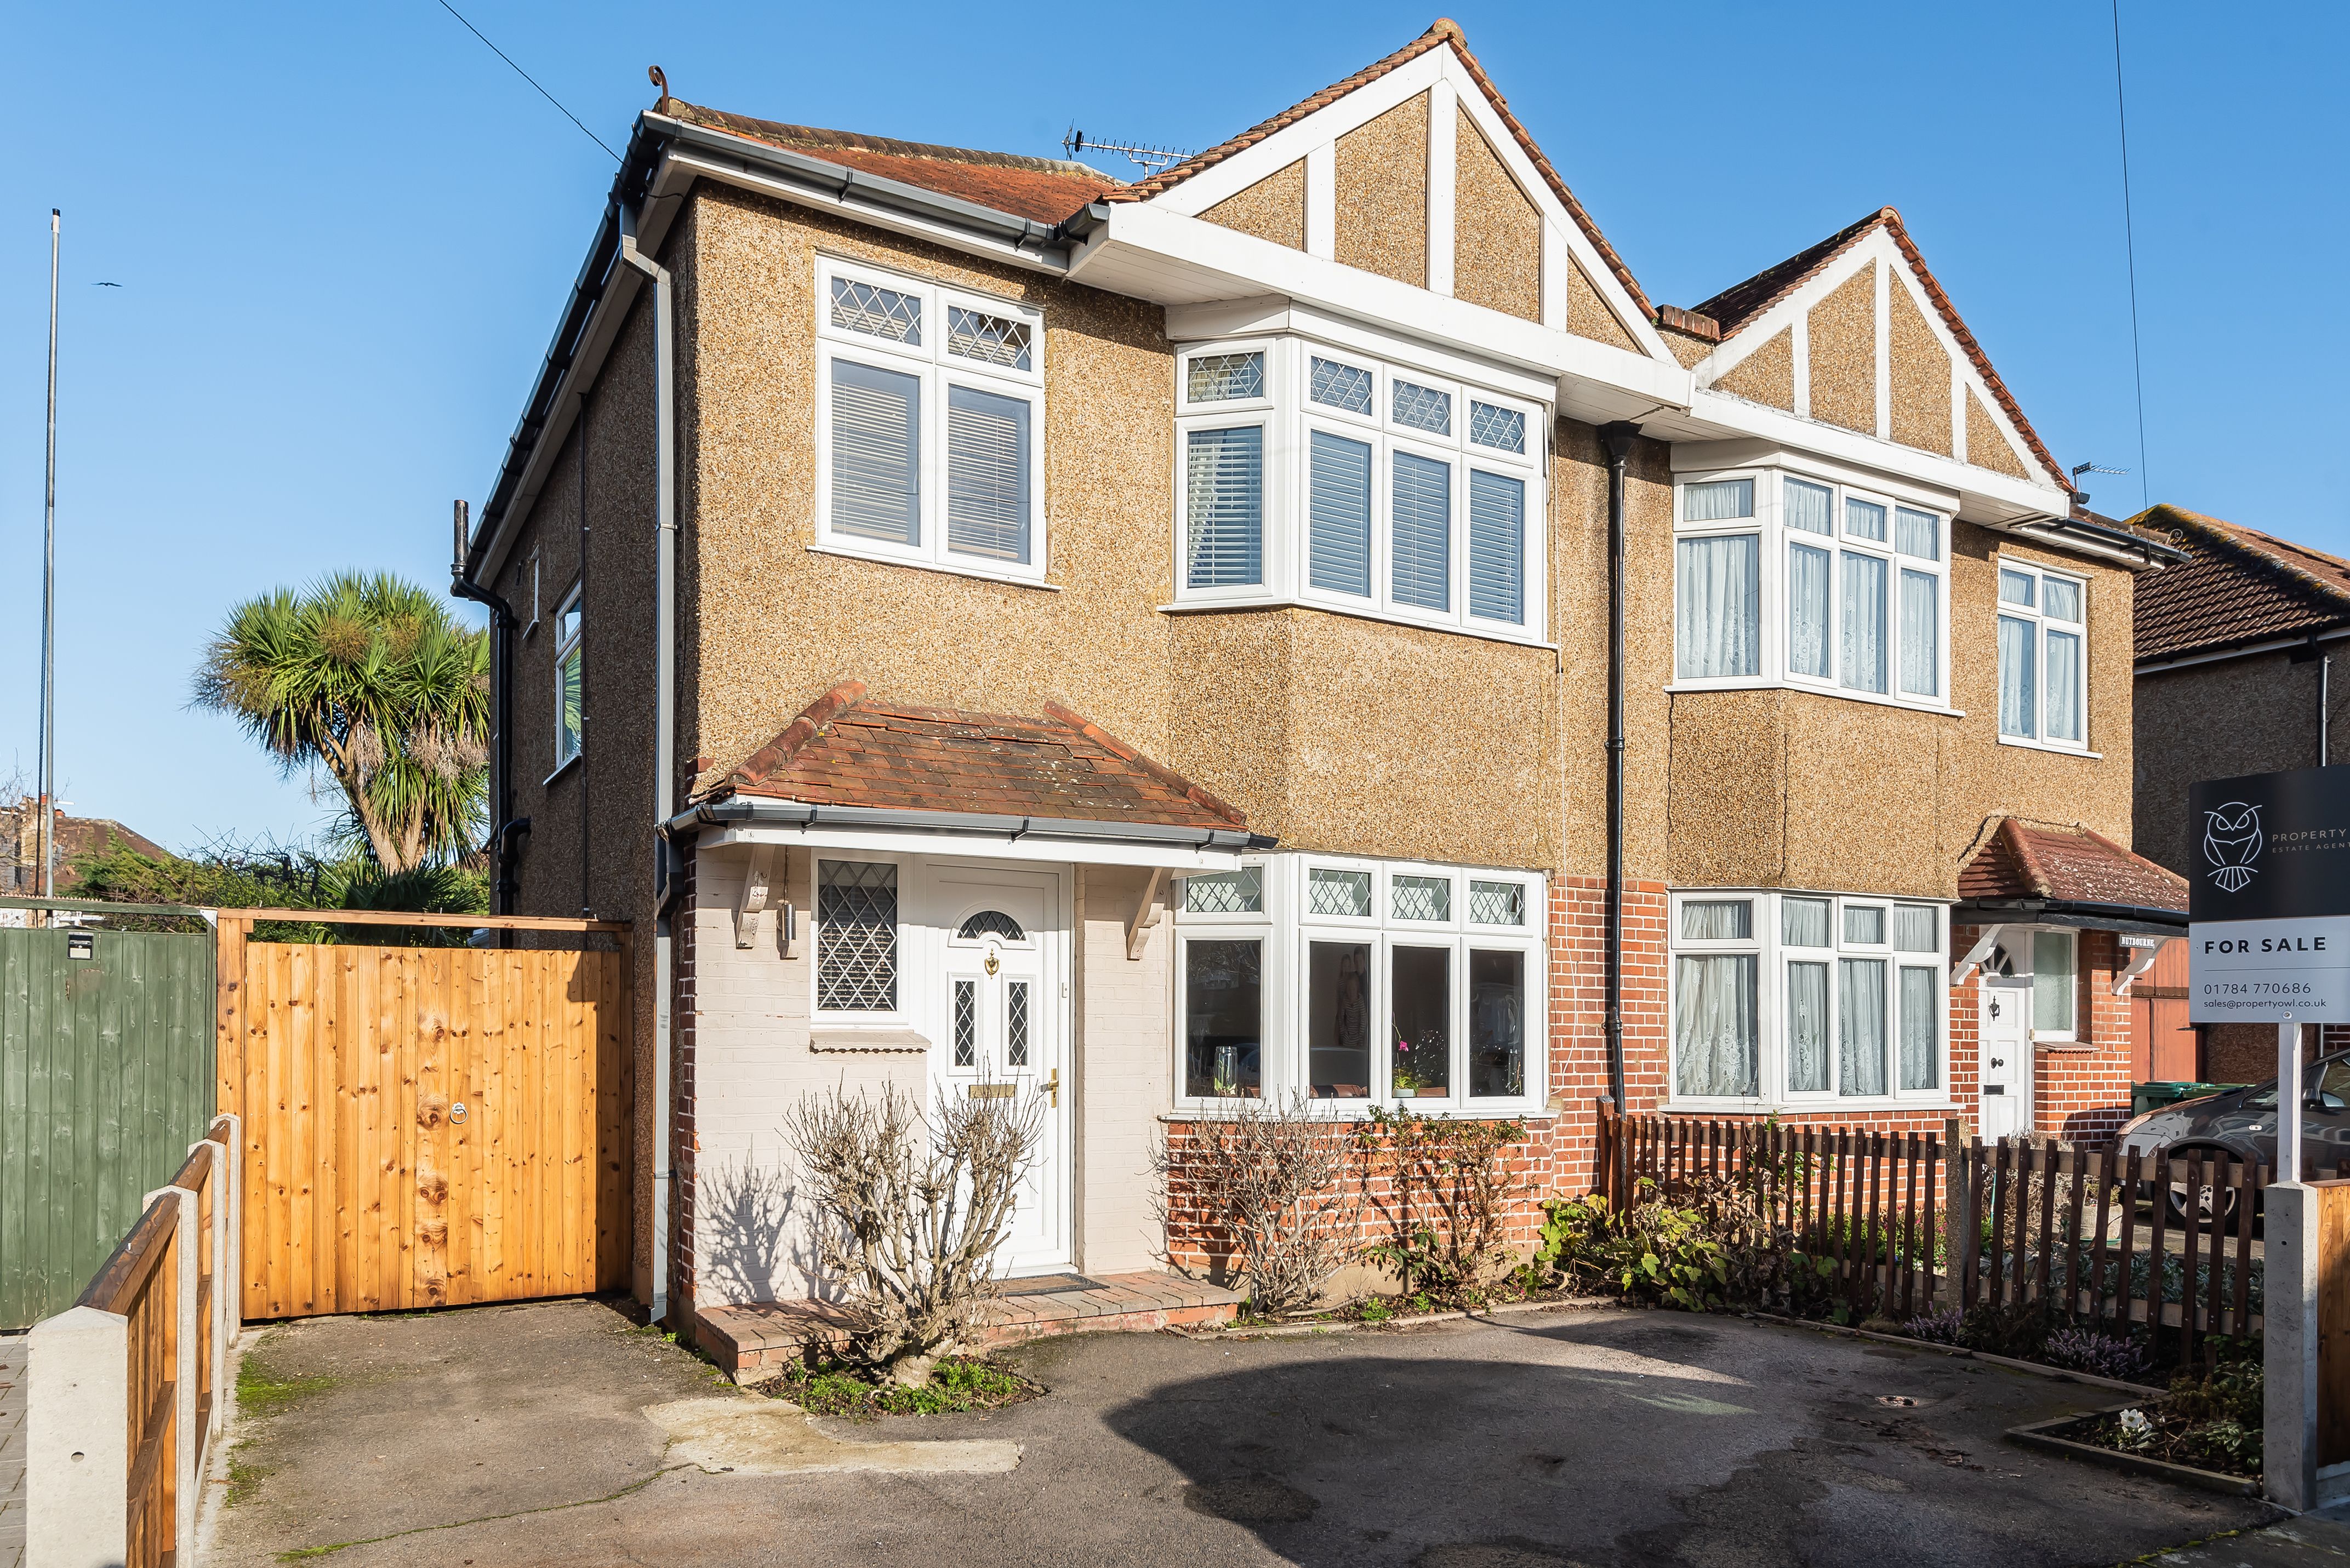 3 bed semi-detached house for sale in Pavilion Gardens, Staines-Upon-Thames - Property Image 1